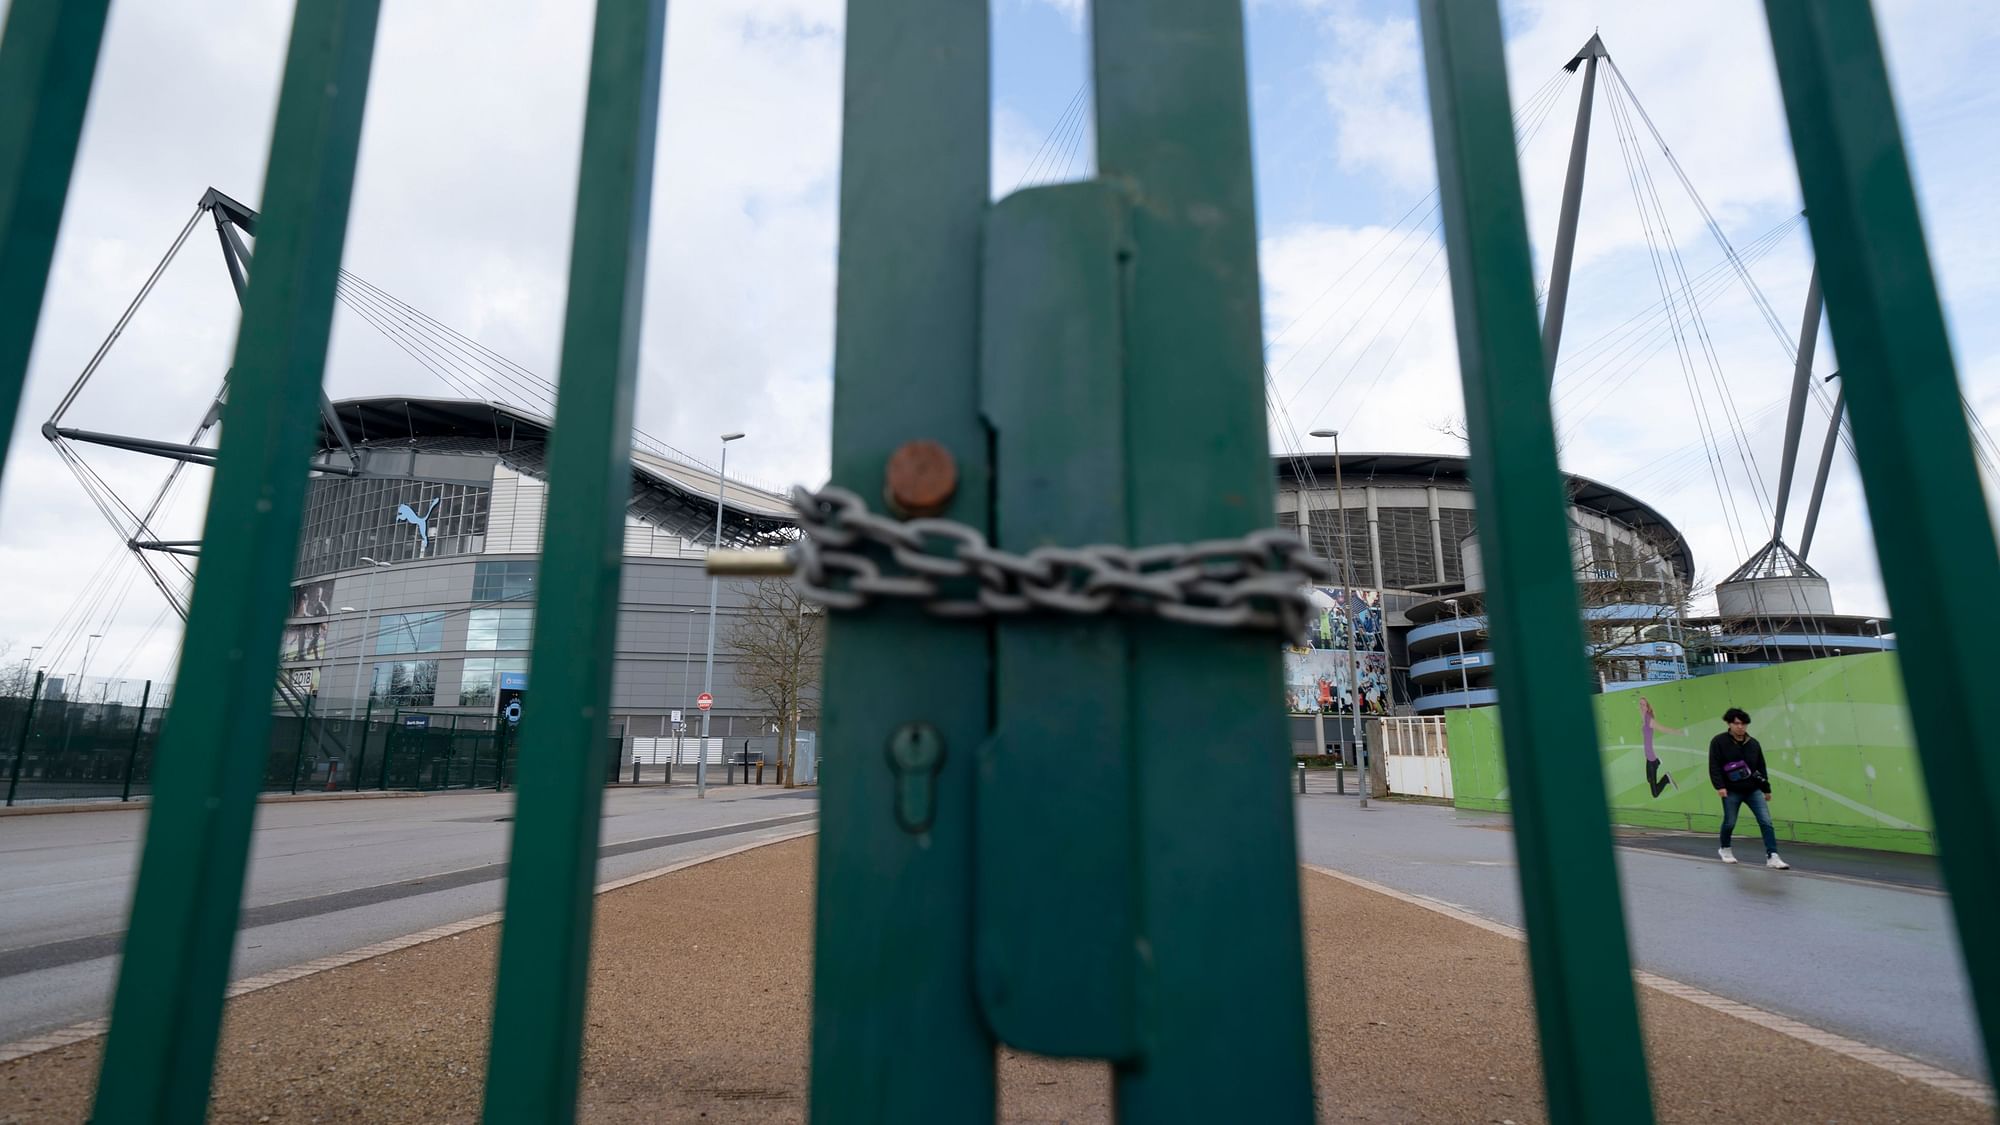 A locked gate is seen by the Etihad Stadium where Manchester City was due to play Burnley in an English Premier League match Saturday March 14, 2020.